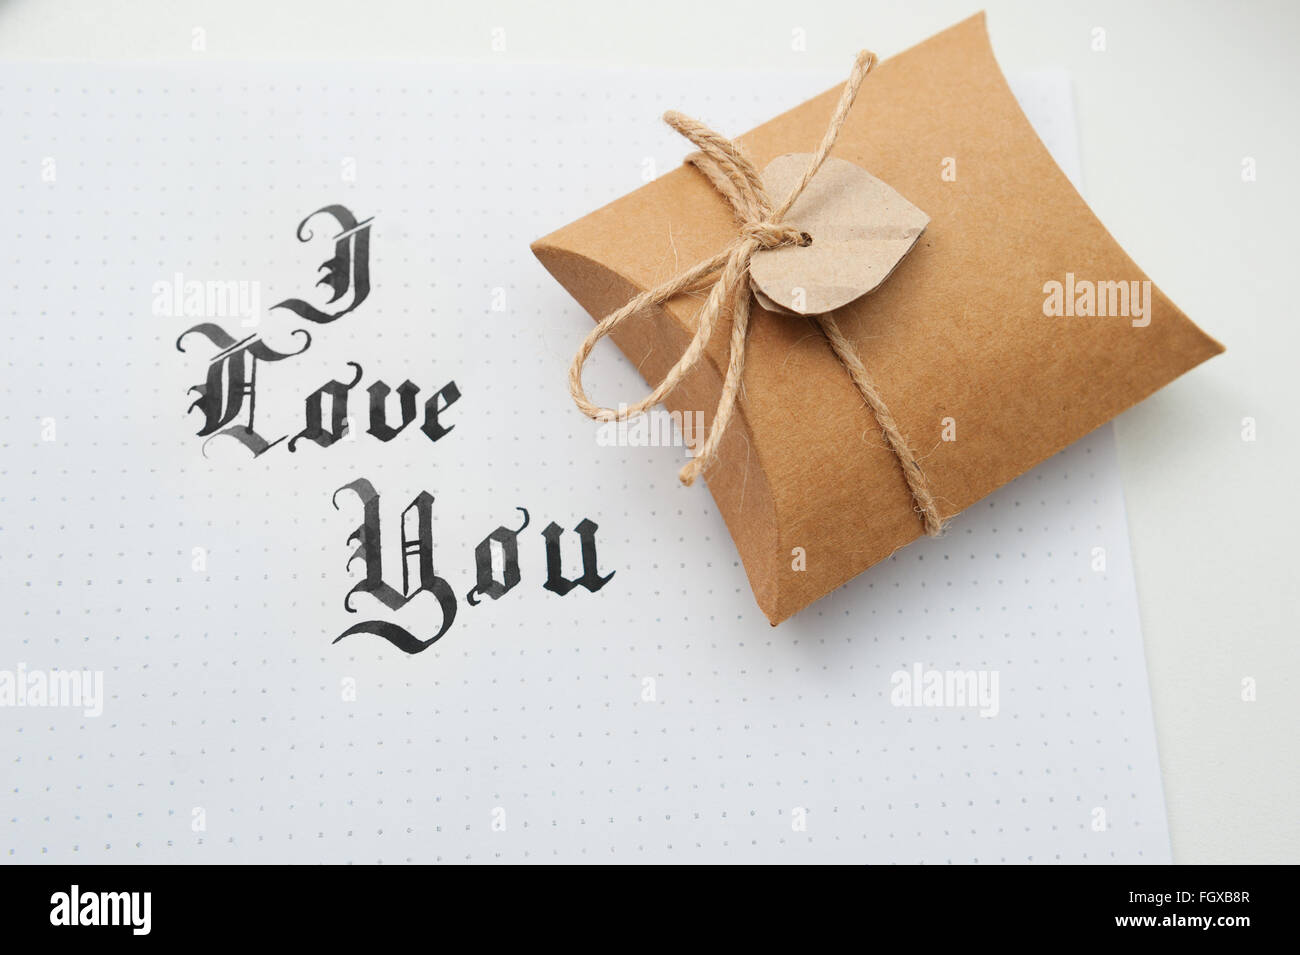 Text god bless you on paper texture and gift box with heart Stock Photo